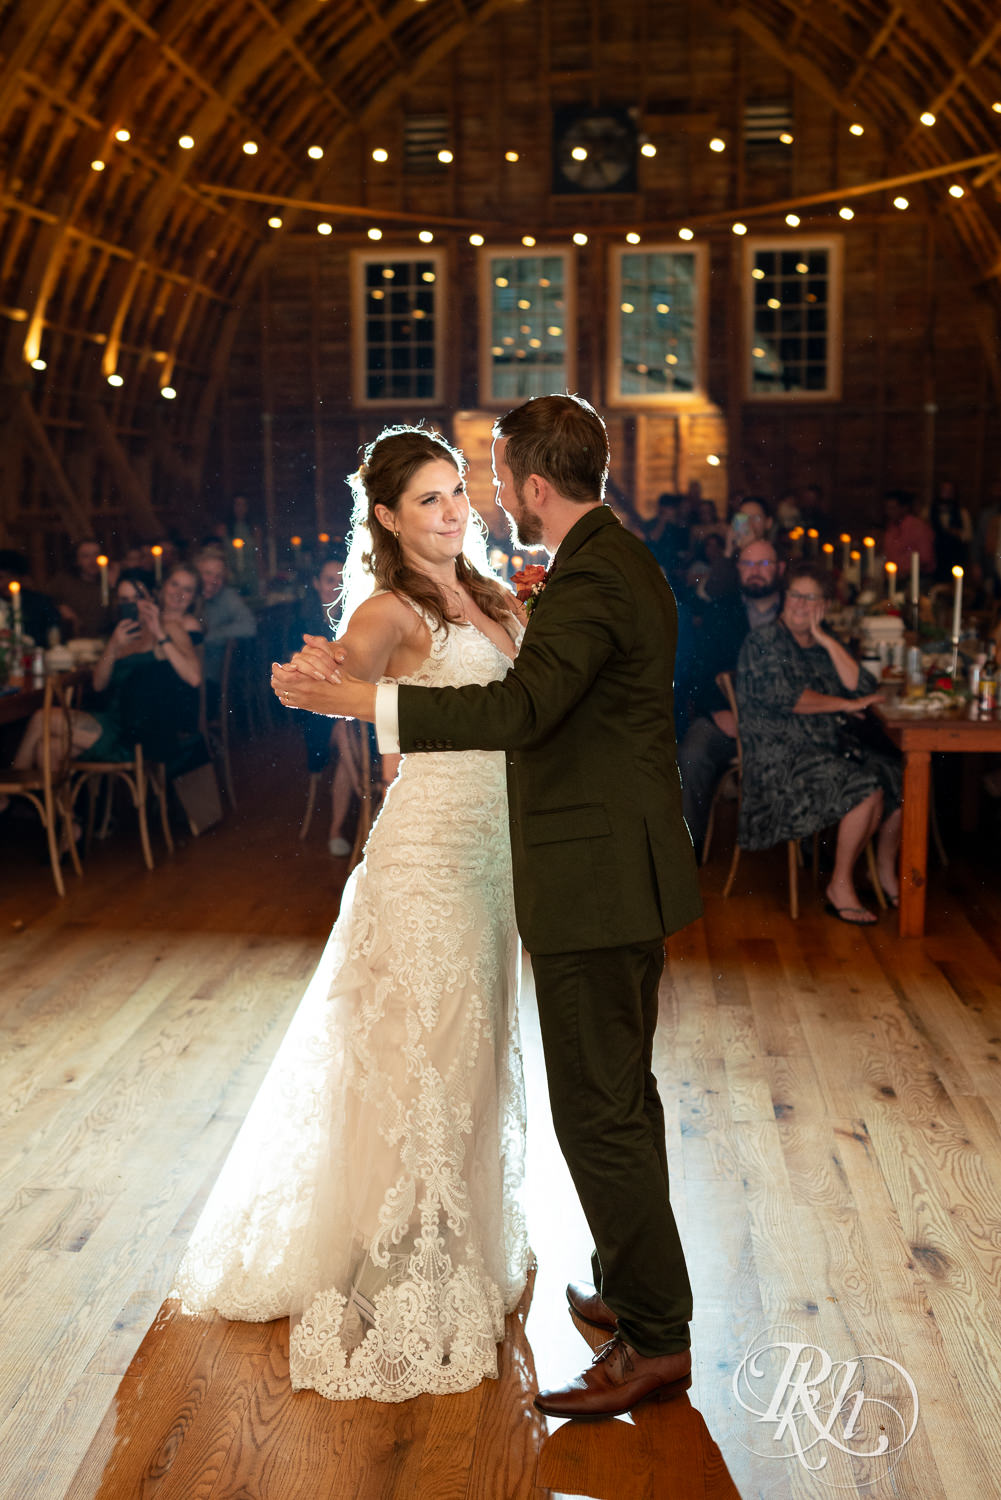 Bride and groom share first dance at Hayvn at Hay River in Boyceville, Wisconsin. 